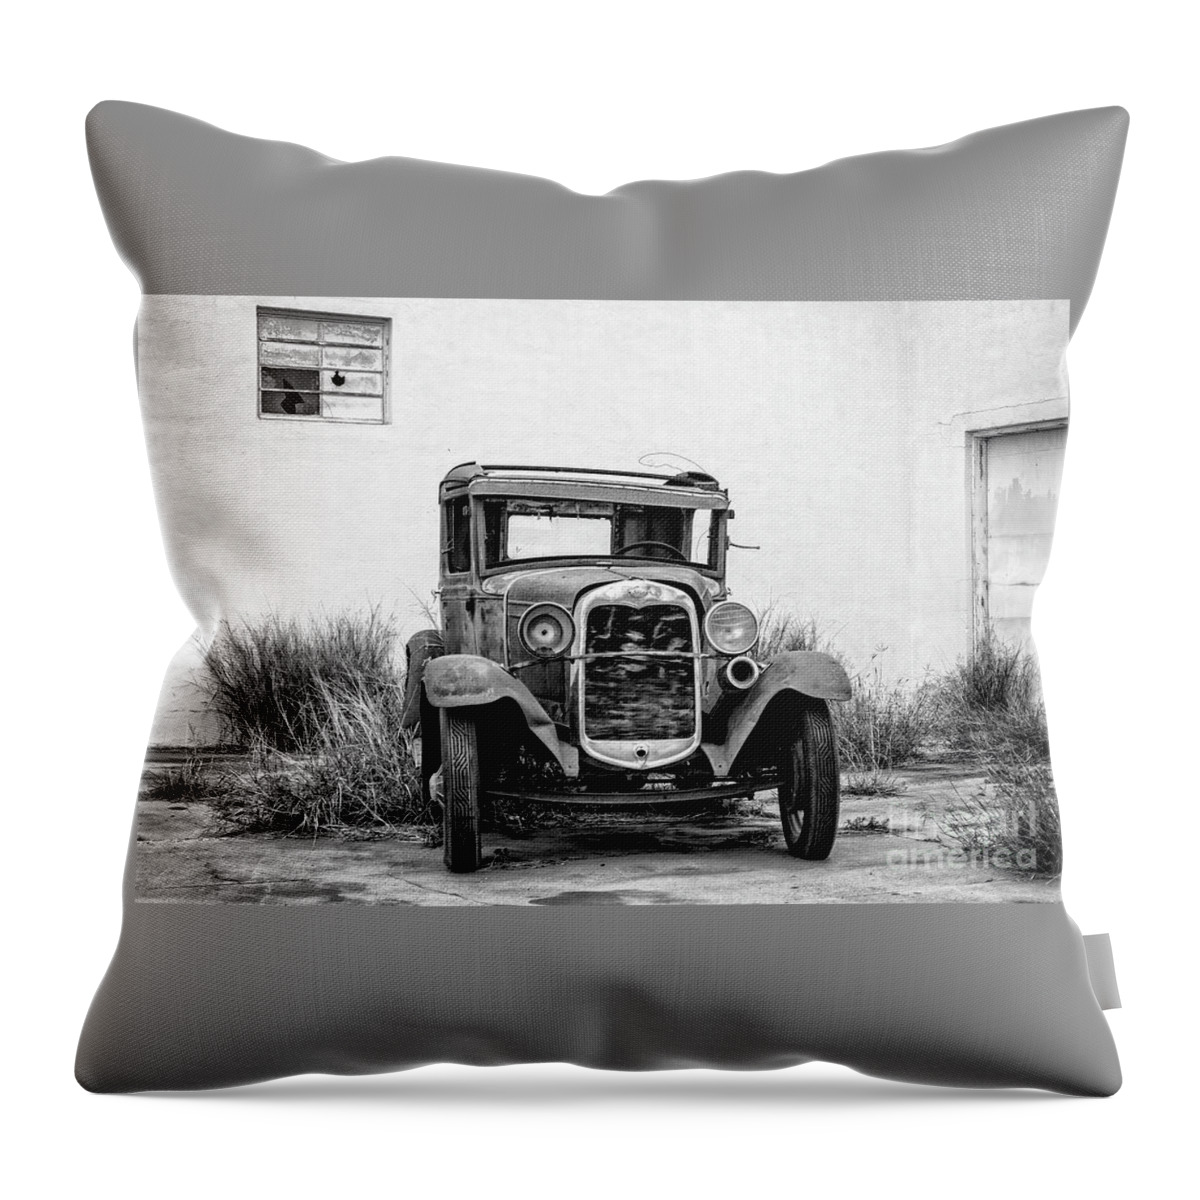 Hard Times Throw Pillow featuring the photograph Hard Times by Imagery by Charly